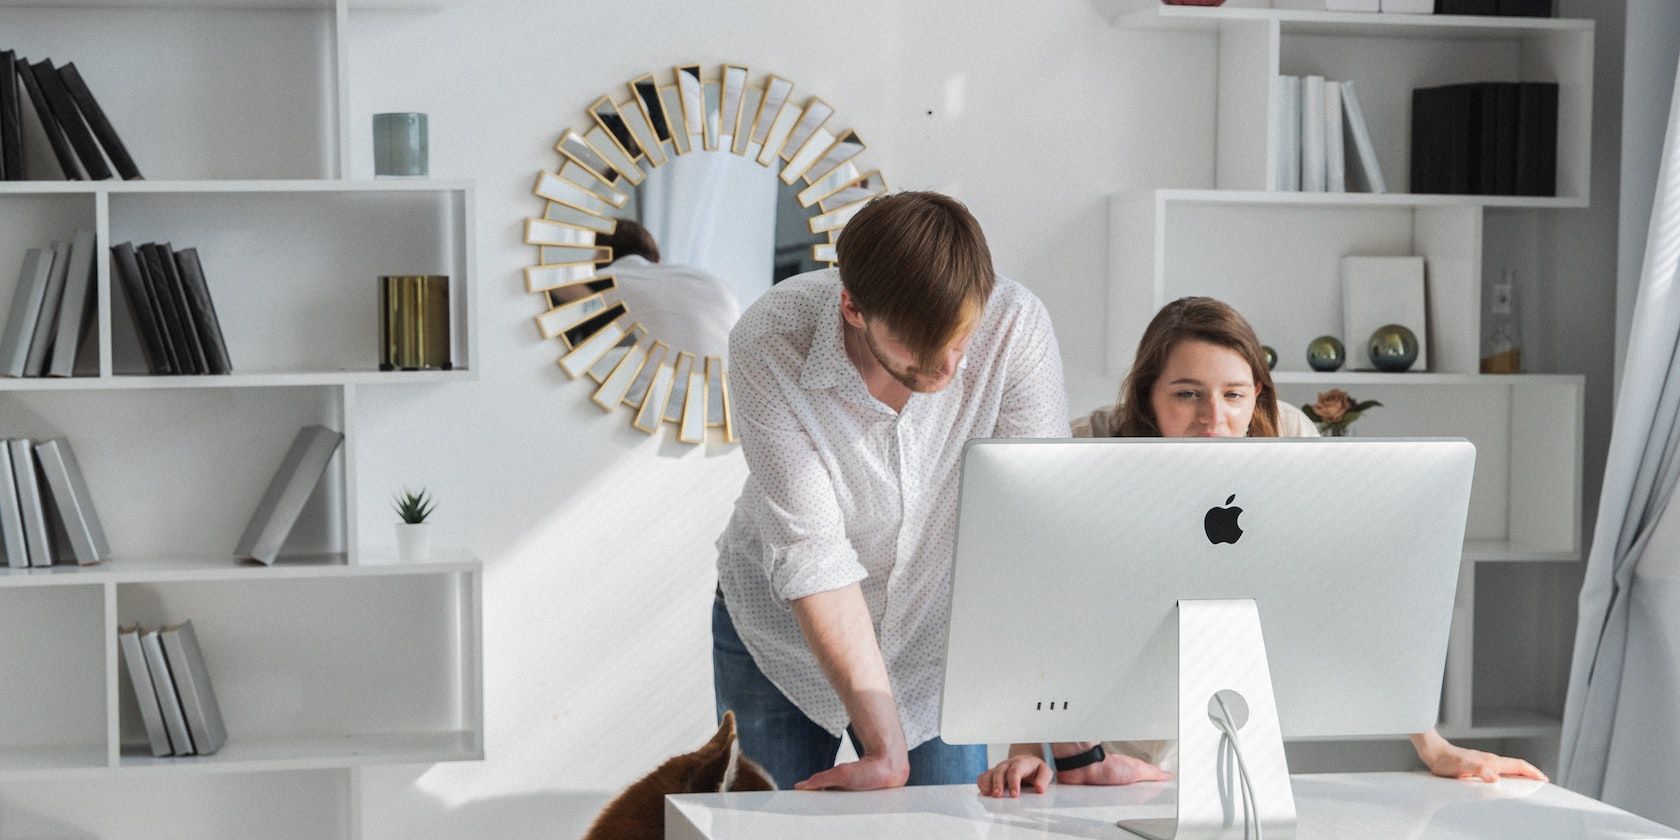 Woman and man setting up iMac together